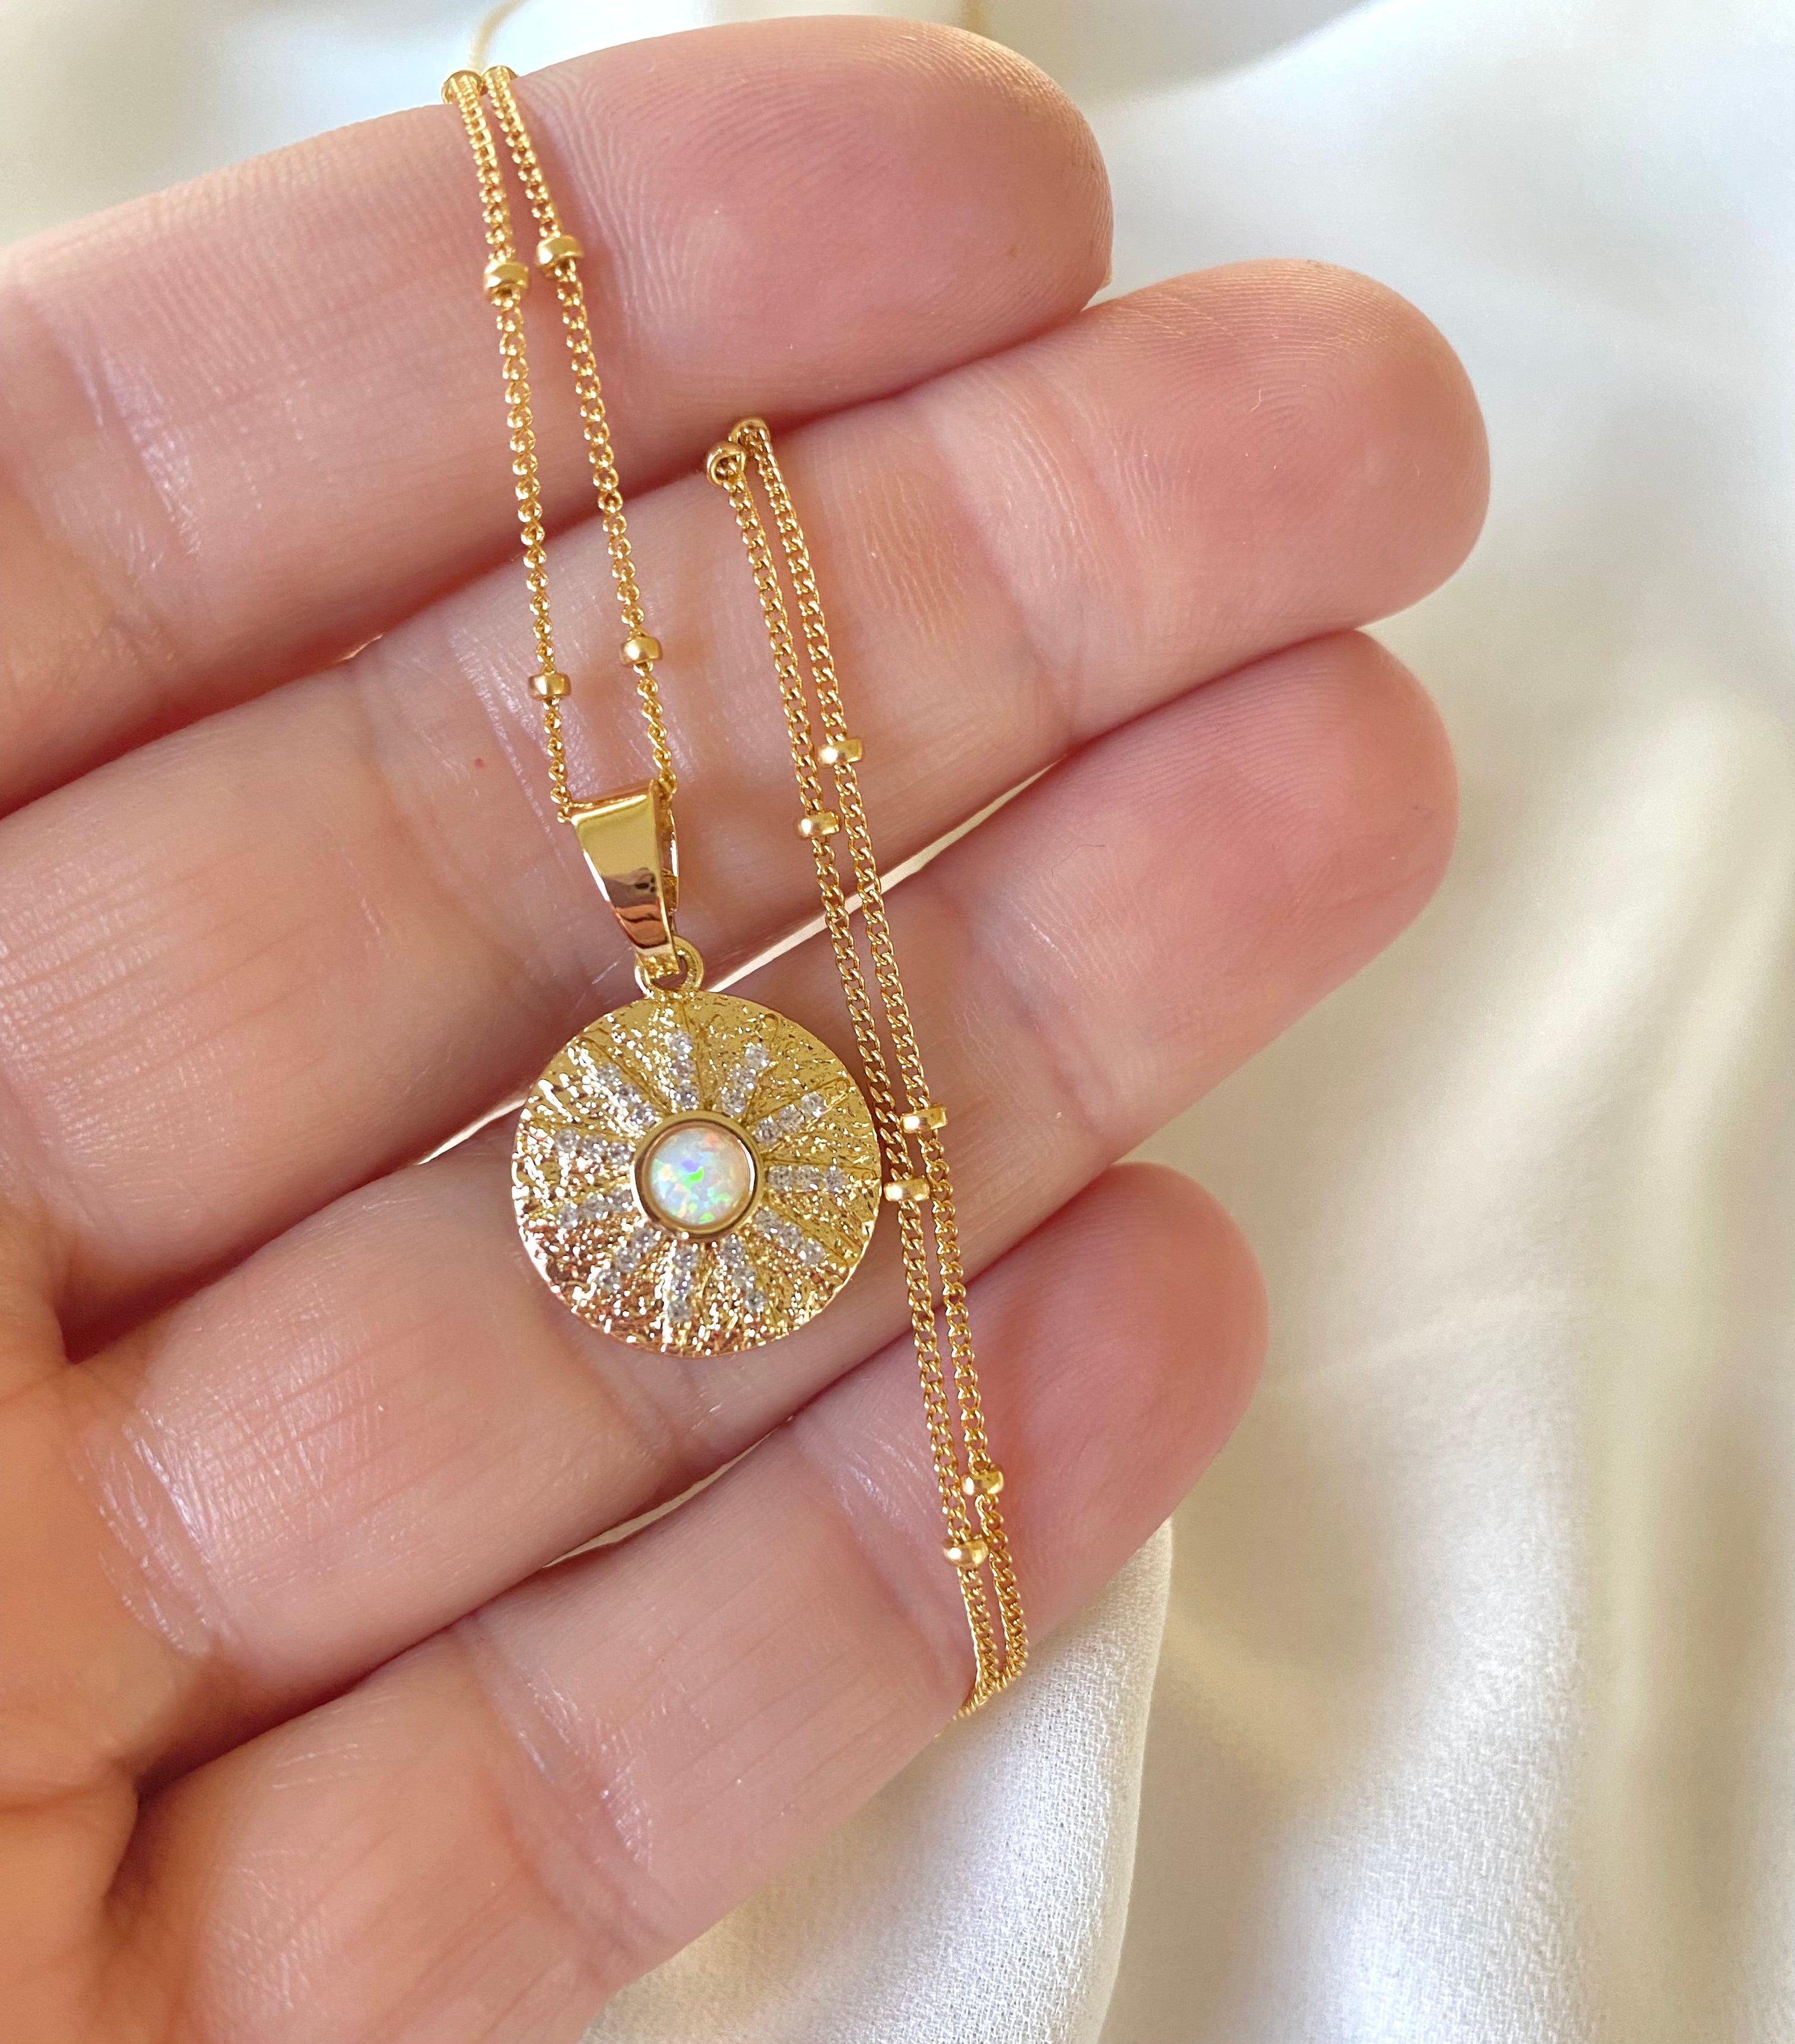 Opal Necklace Opal Coin Pendant Necklace October Birthstone Gold Filled Genuine Opal Charm Crystal Medallion Necklace Minimalist Jewelry